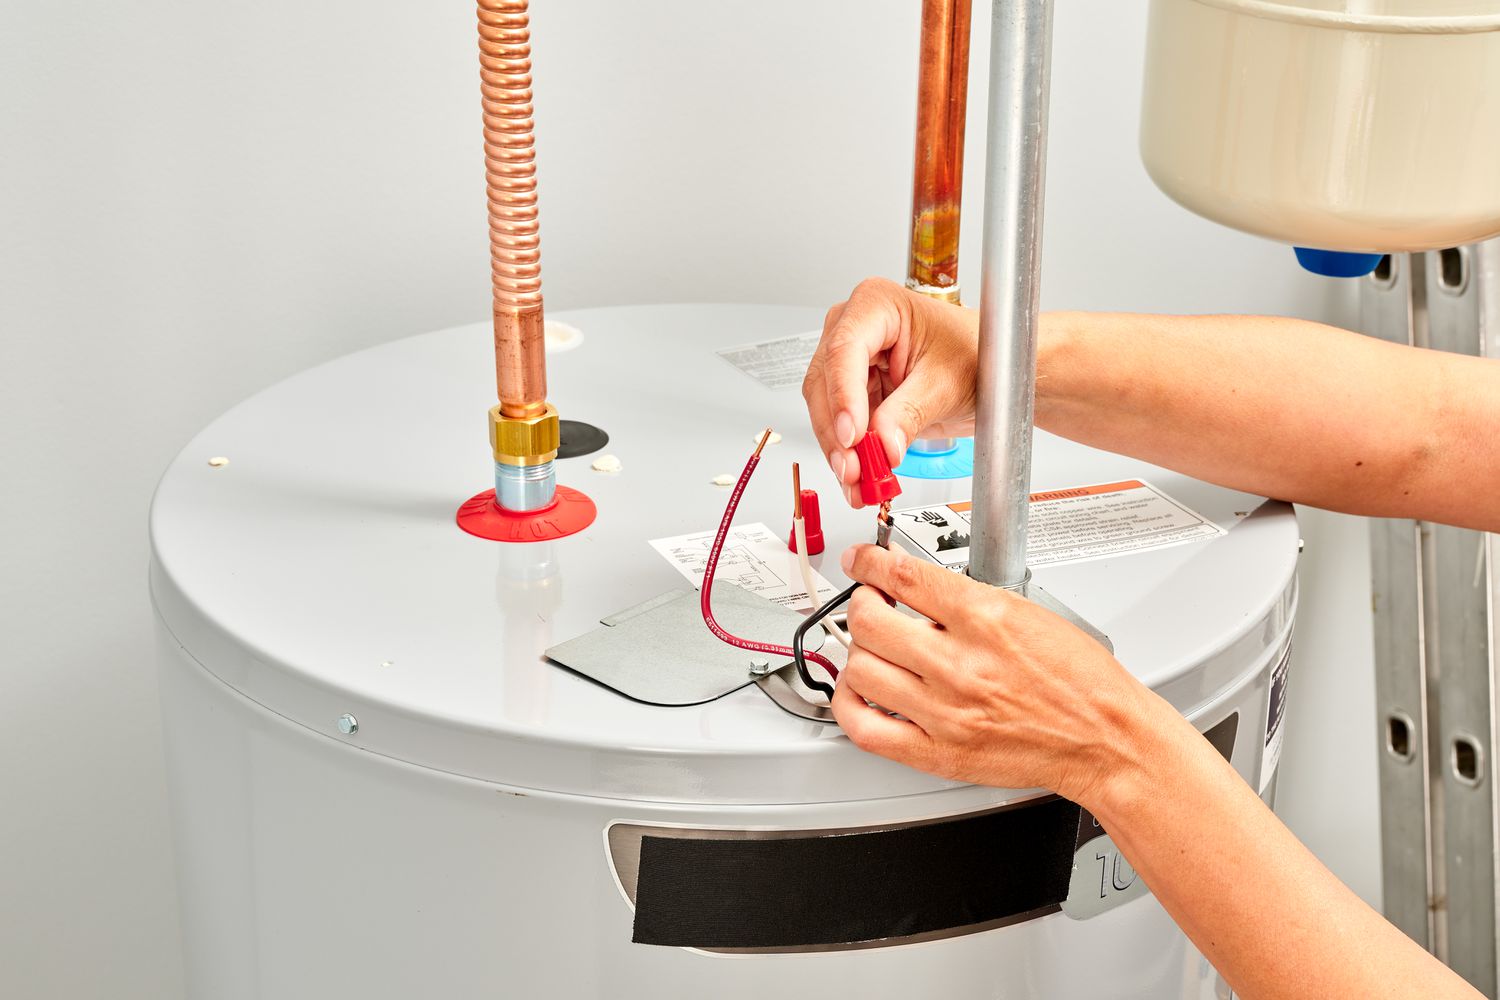 Electric Water Heater Wiring Requirements